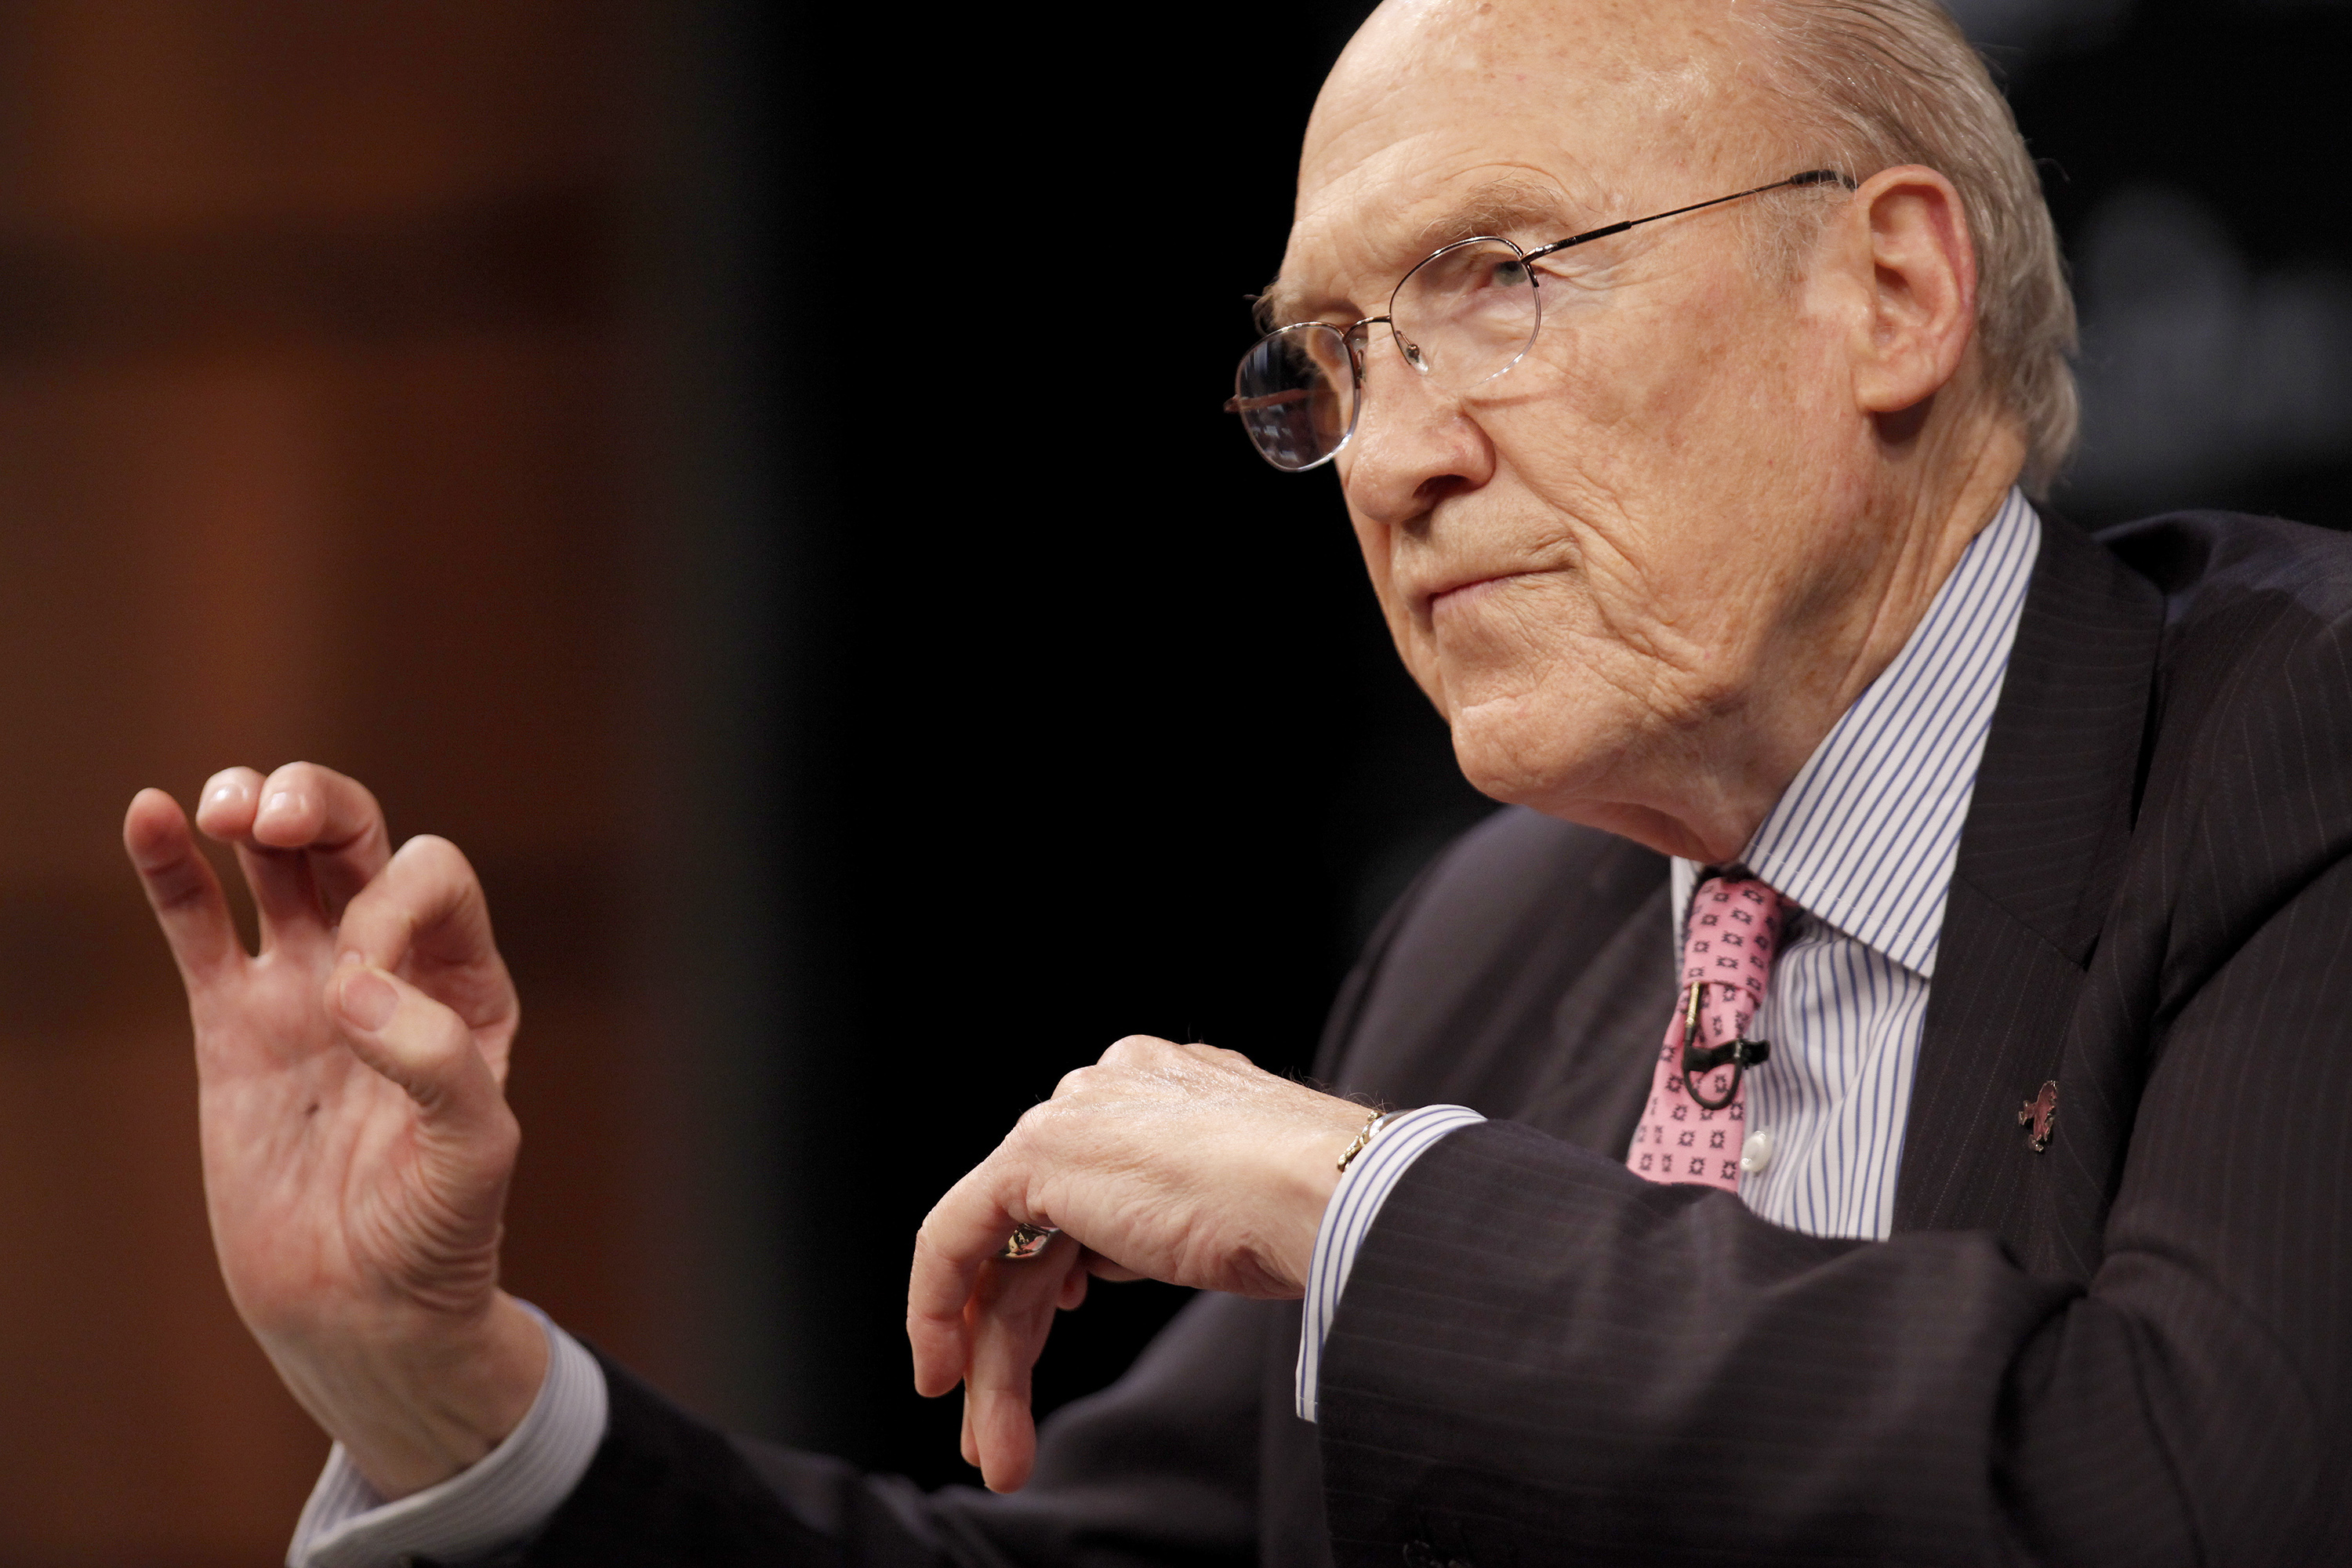 Alan Simpson, former co-chairman of the National Commission on Fiscal Responsibility and Reform, speaks during the Moment Of Truth Project event in Washington, D.C., U.S., on April 19, 2013. (Bloomberg via Getty Images)